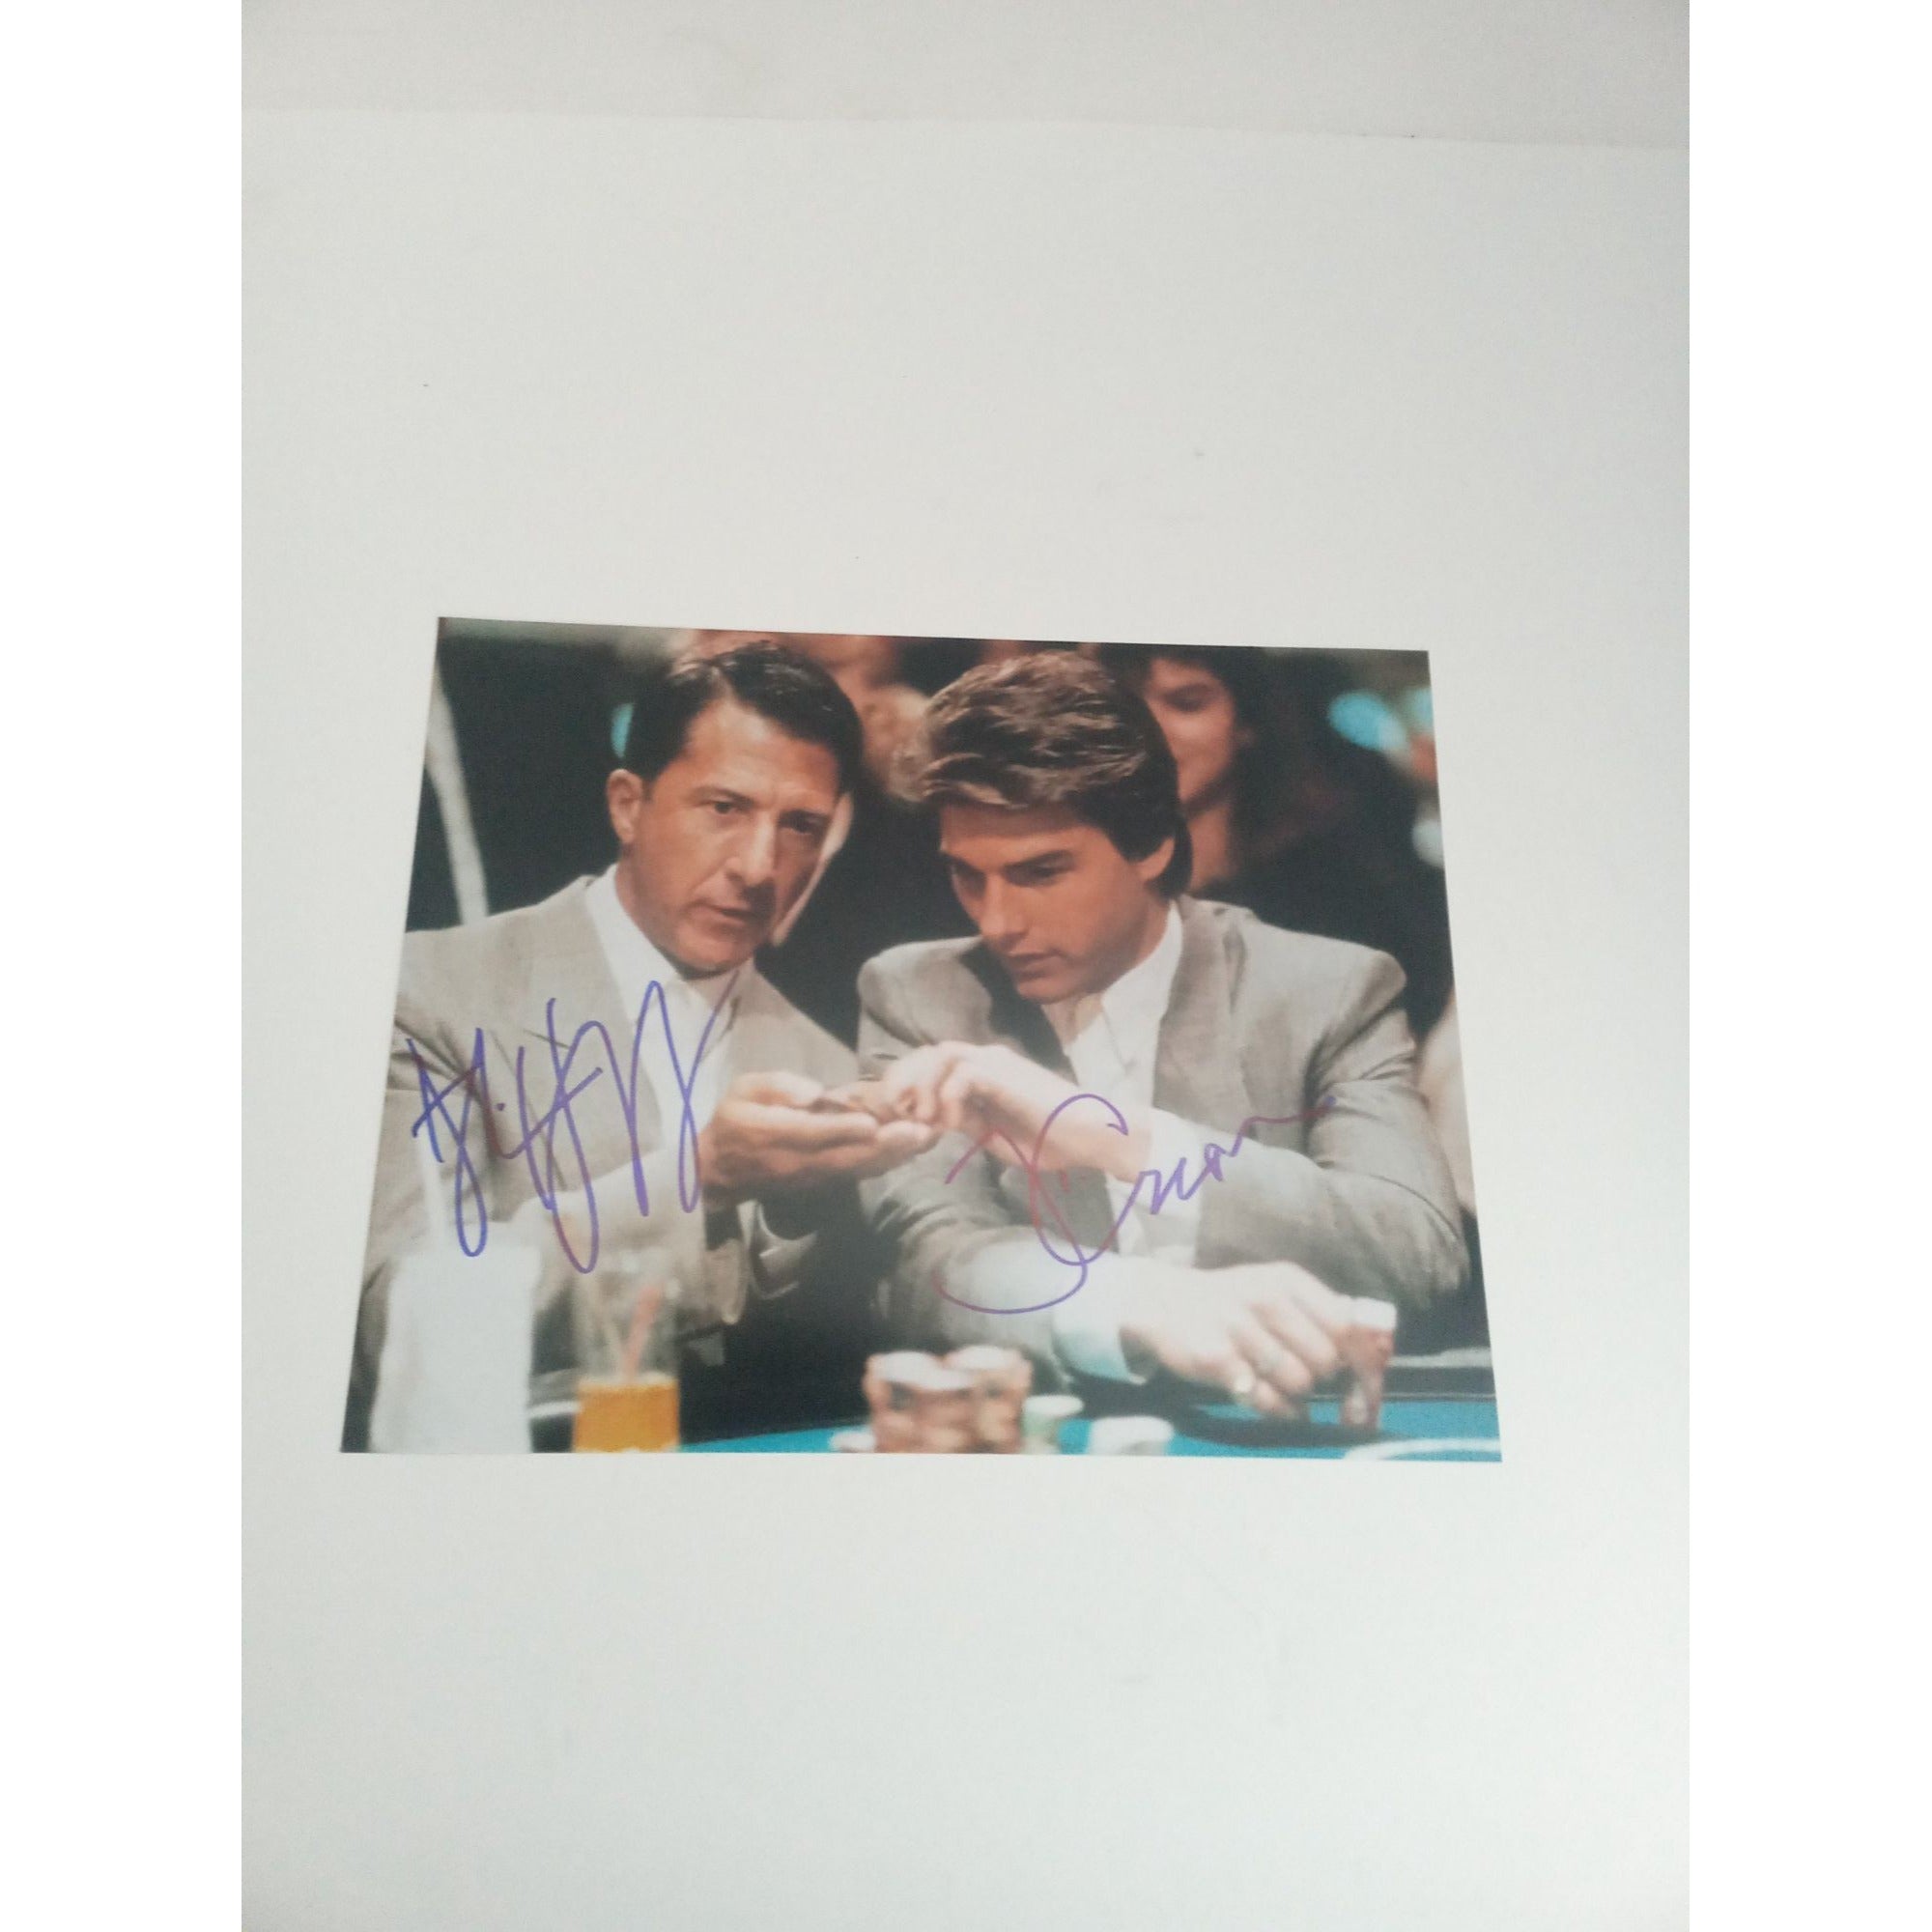 Rain Man Dustin Hoffman and Tom Cruise 8 x 10 signed photo with proof